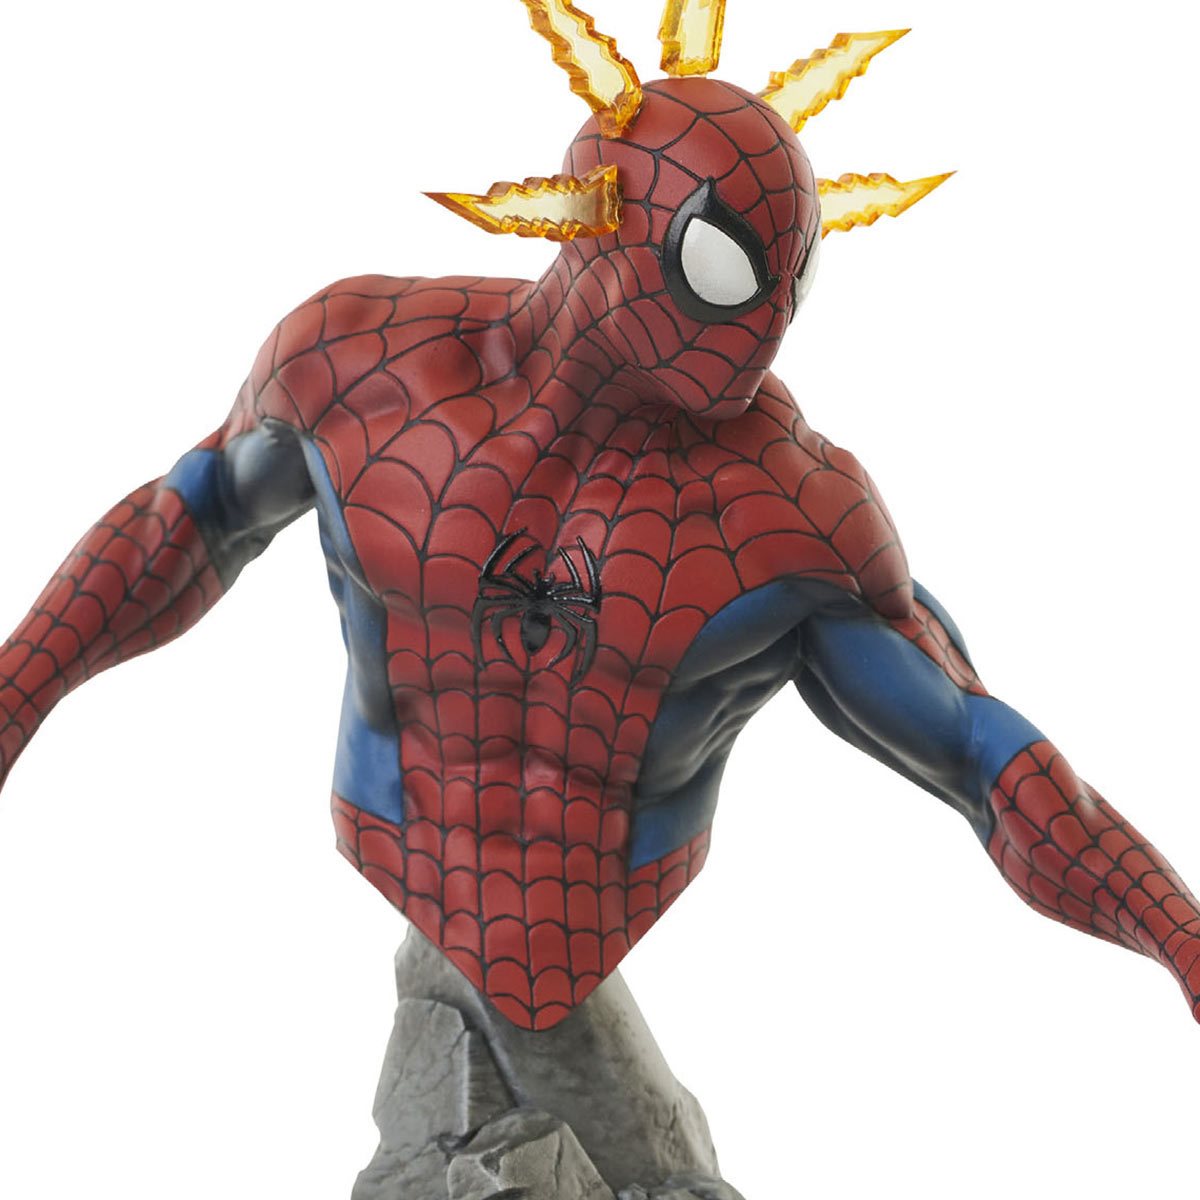 Legends In 3D Marvel Spider-Man Scale Bust ゲームキャラクター | east-wind.jp